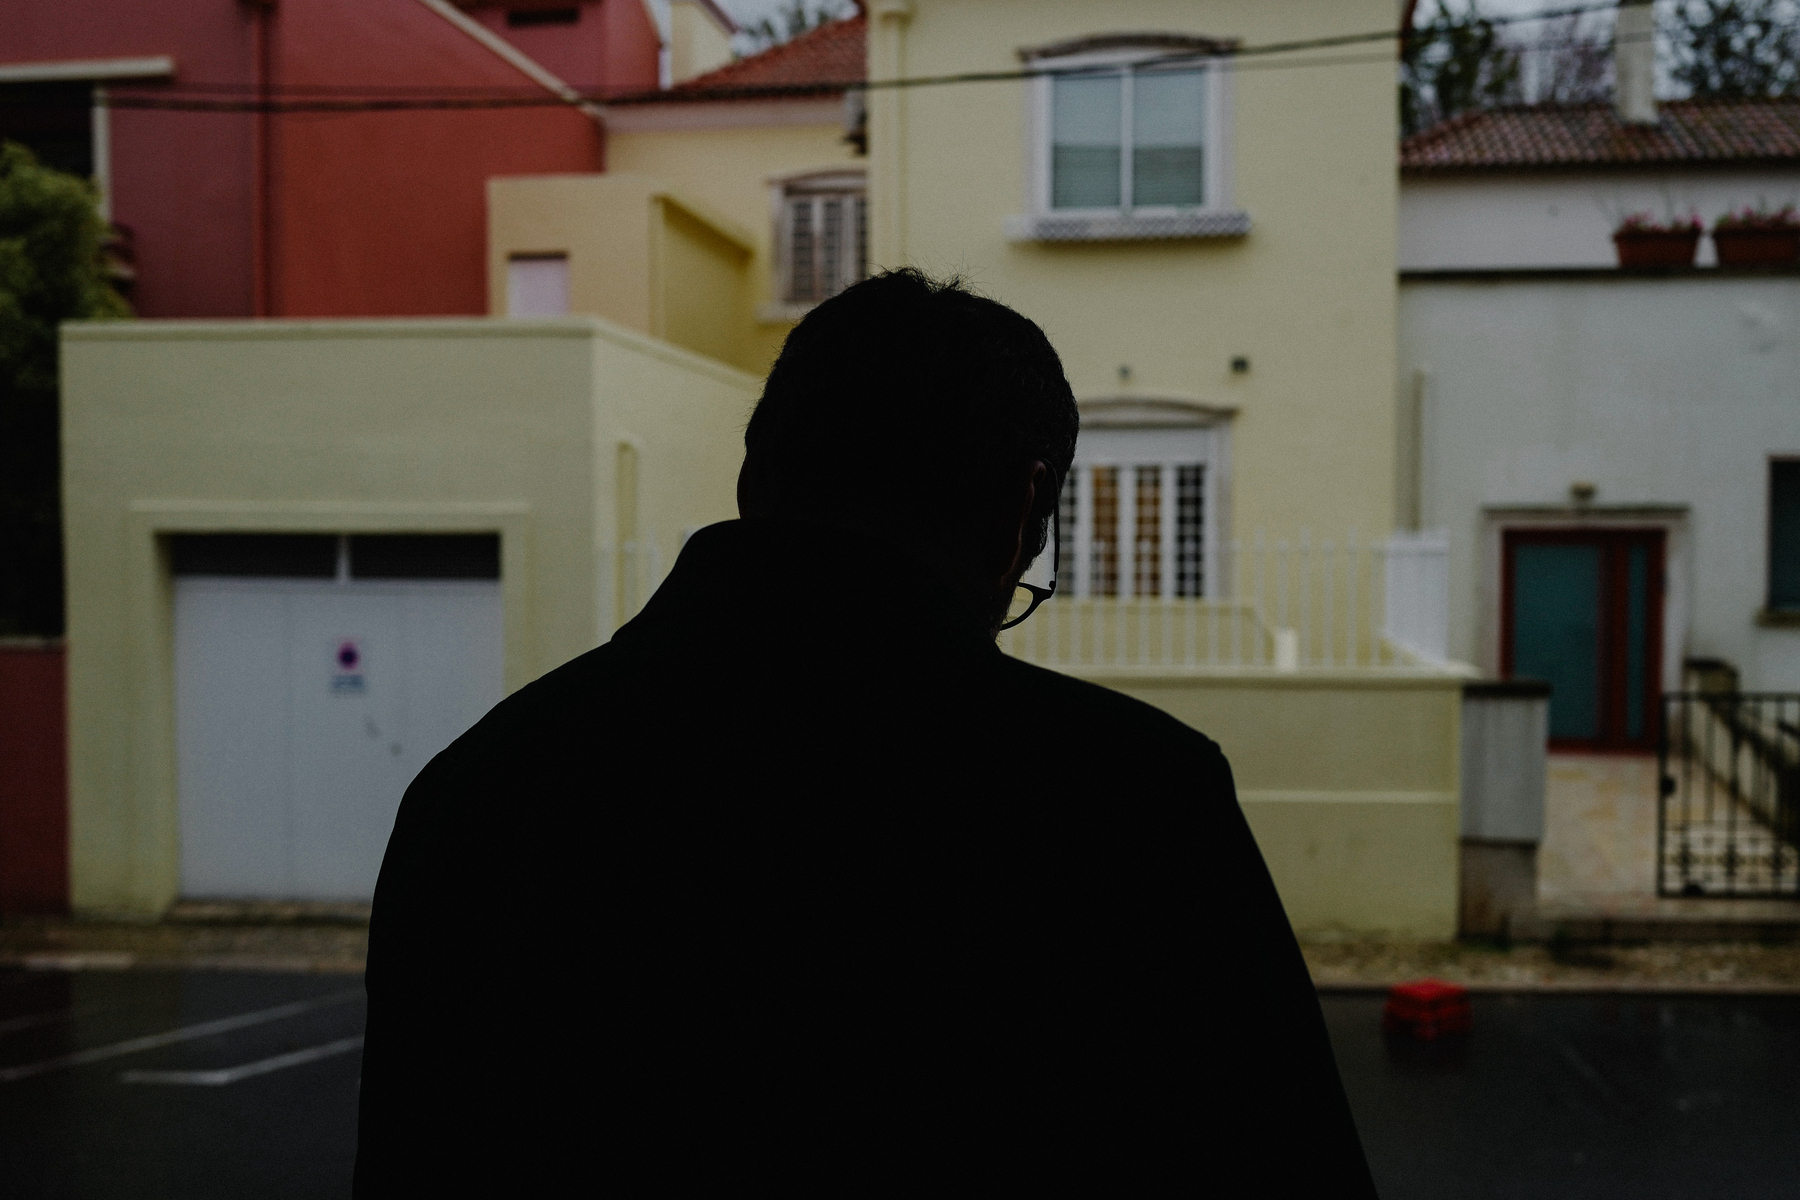 Silhouetted individual facing away from the camera, looking at a street lined with colorful buildings, under overcast skies.